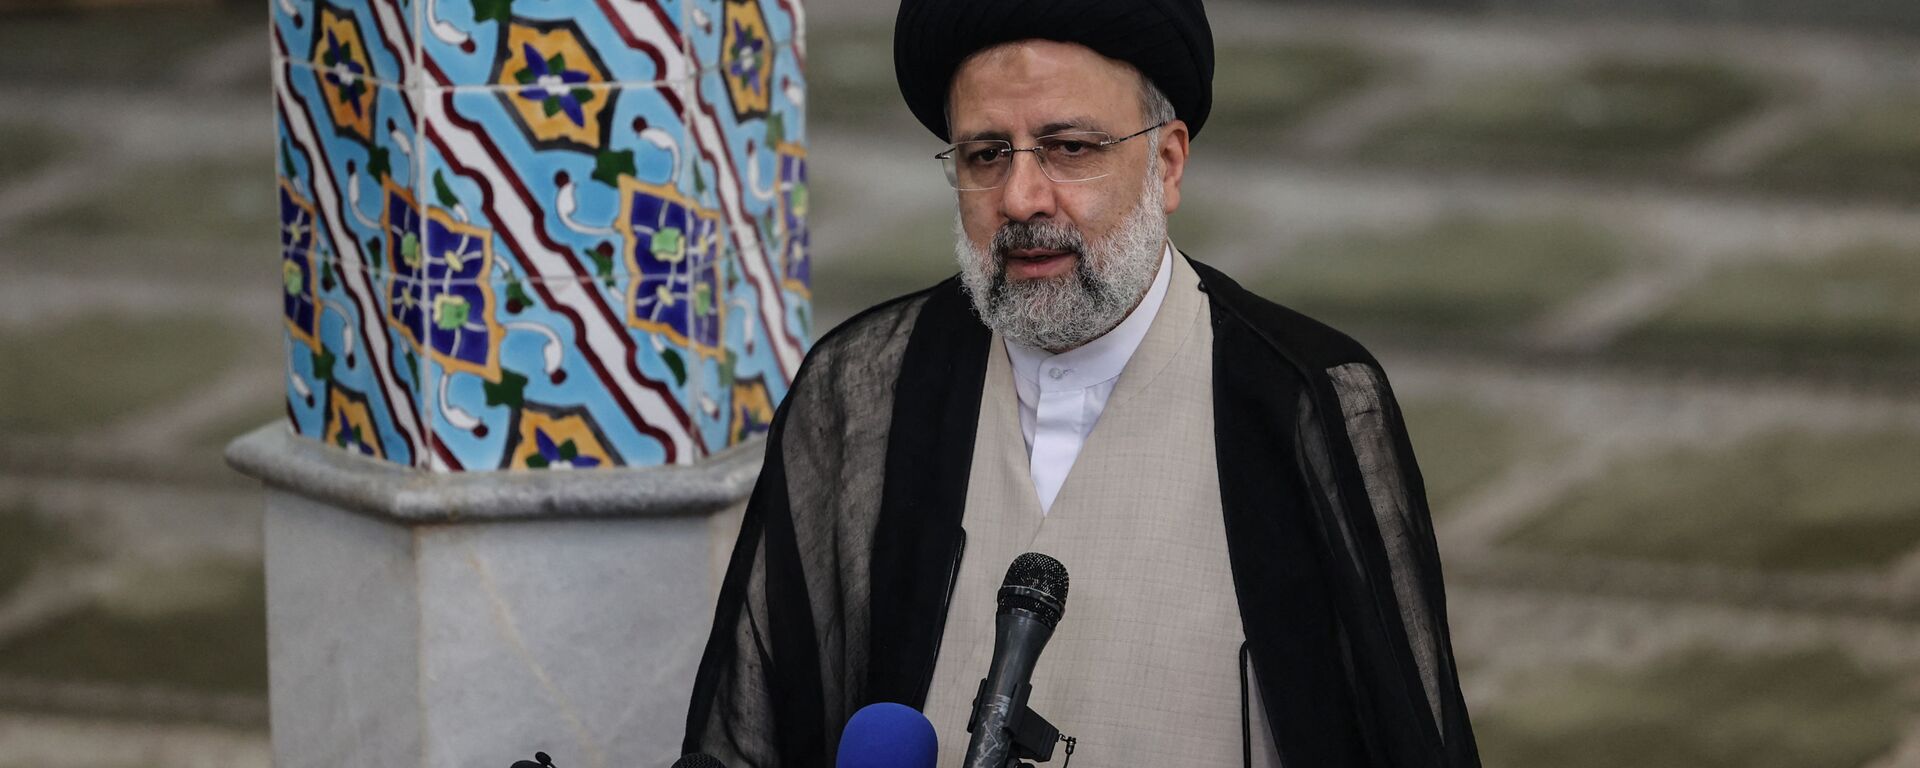 Ebrahim Raisi gives a news conference after voting in the presidential election, at a polling station in the capital Tehran, on June 18, 2021. - Raisi on June 19 declared the winner of a presidential election, a widely anticipated result after many political heavyweights were barred from running. - Sputnik International, 1920, 21.06.2021